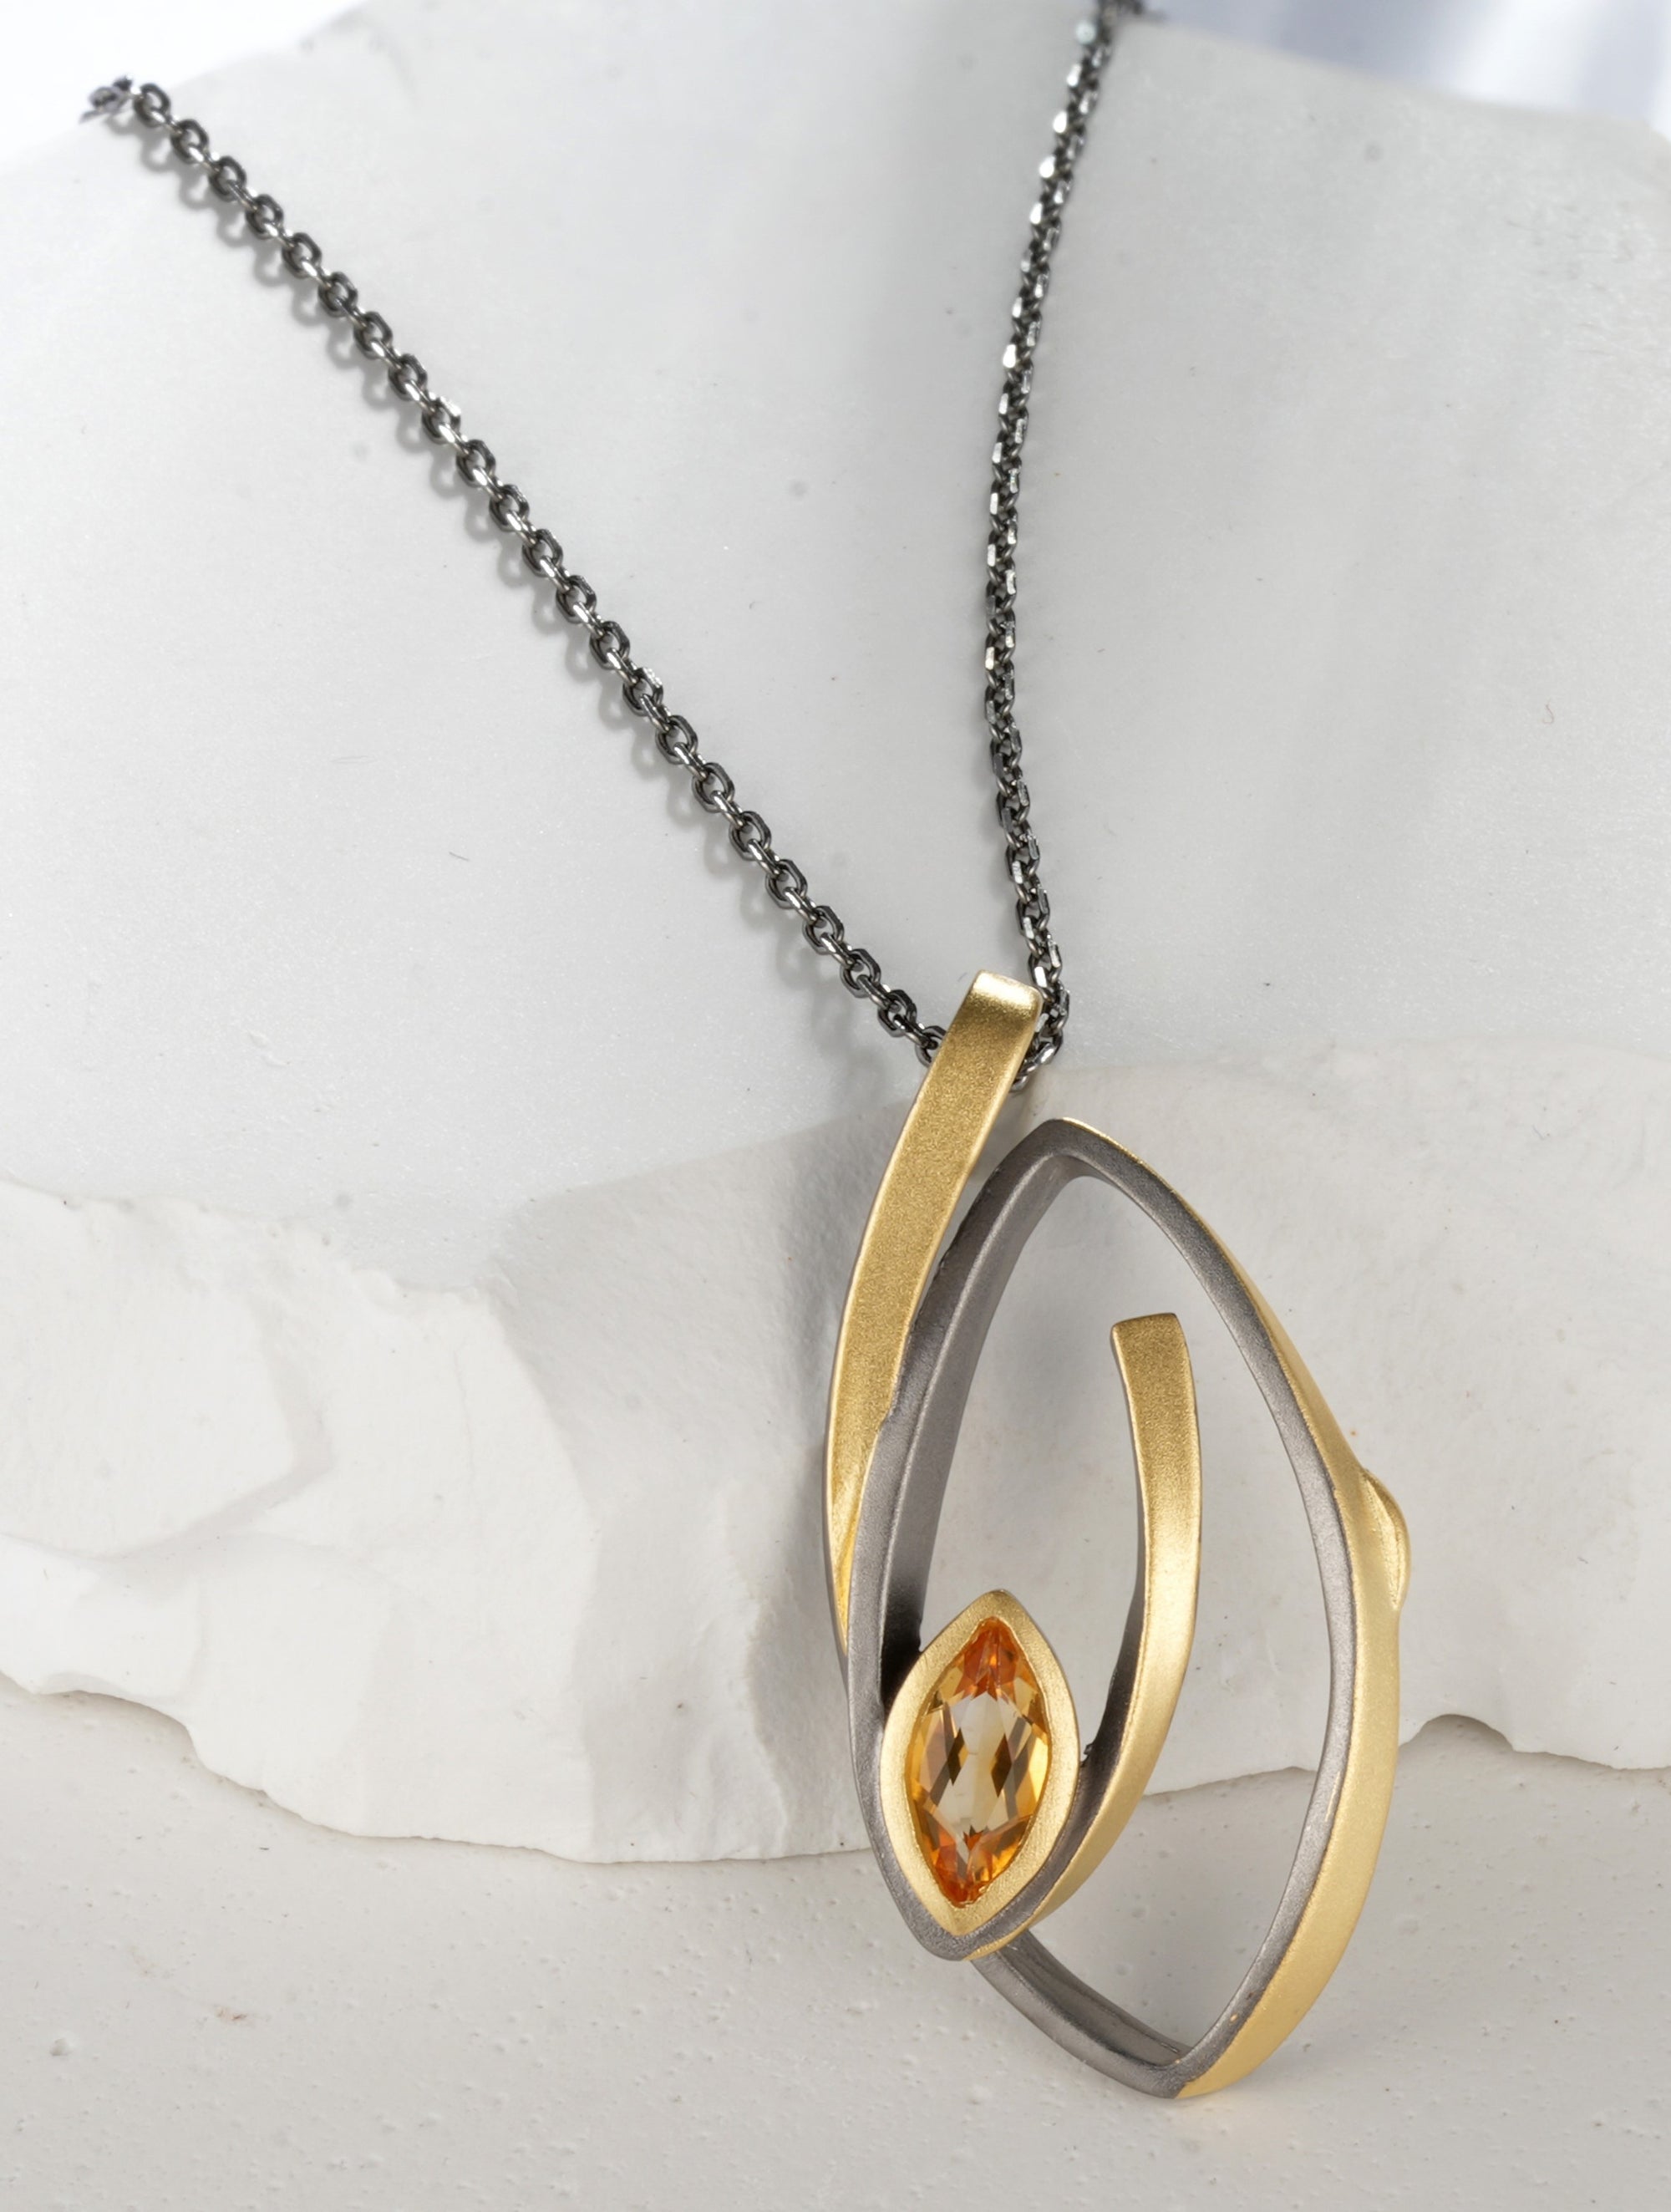 A silver necklace, gold plated with a yellow citrine stone.